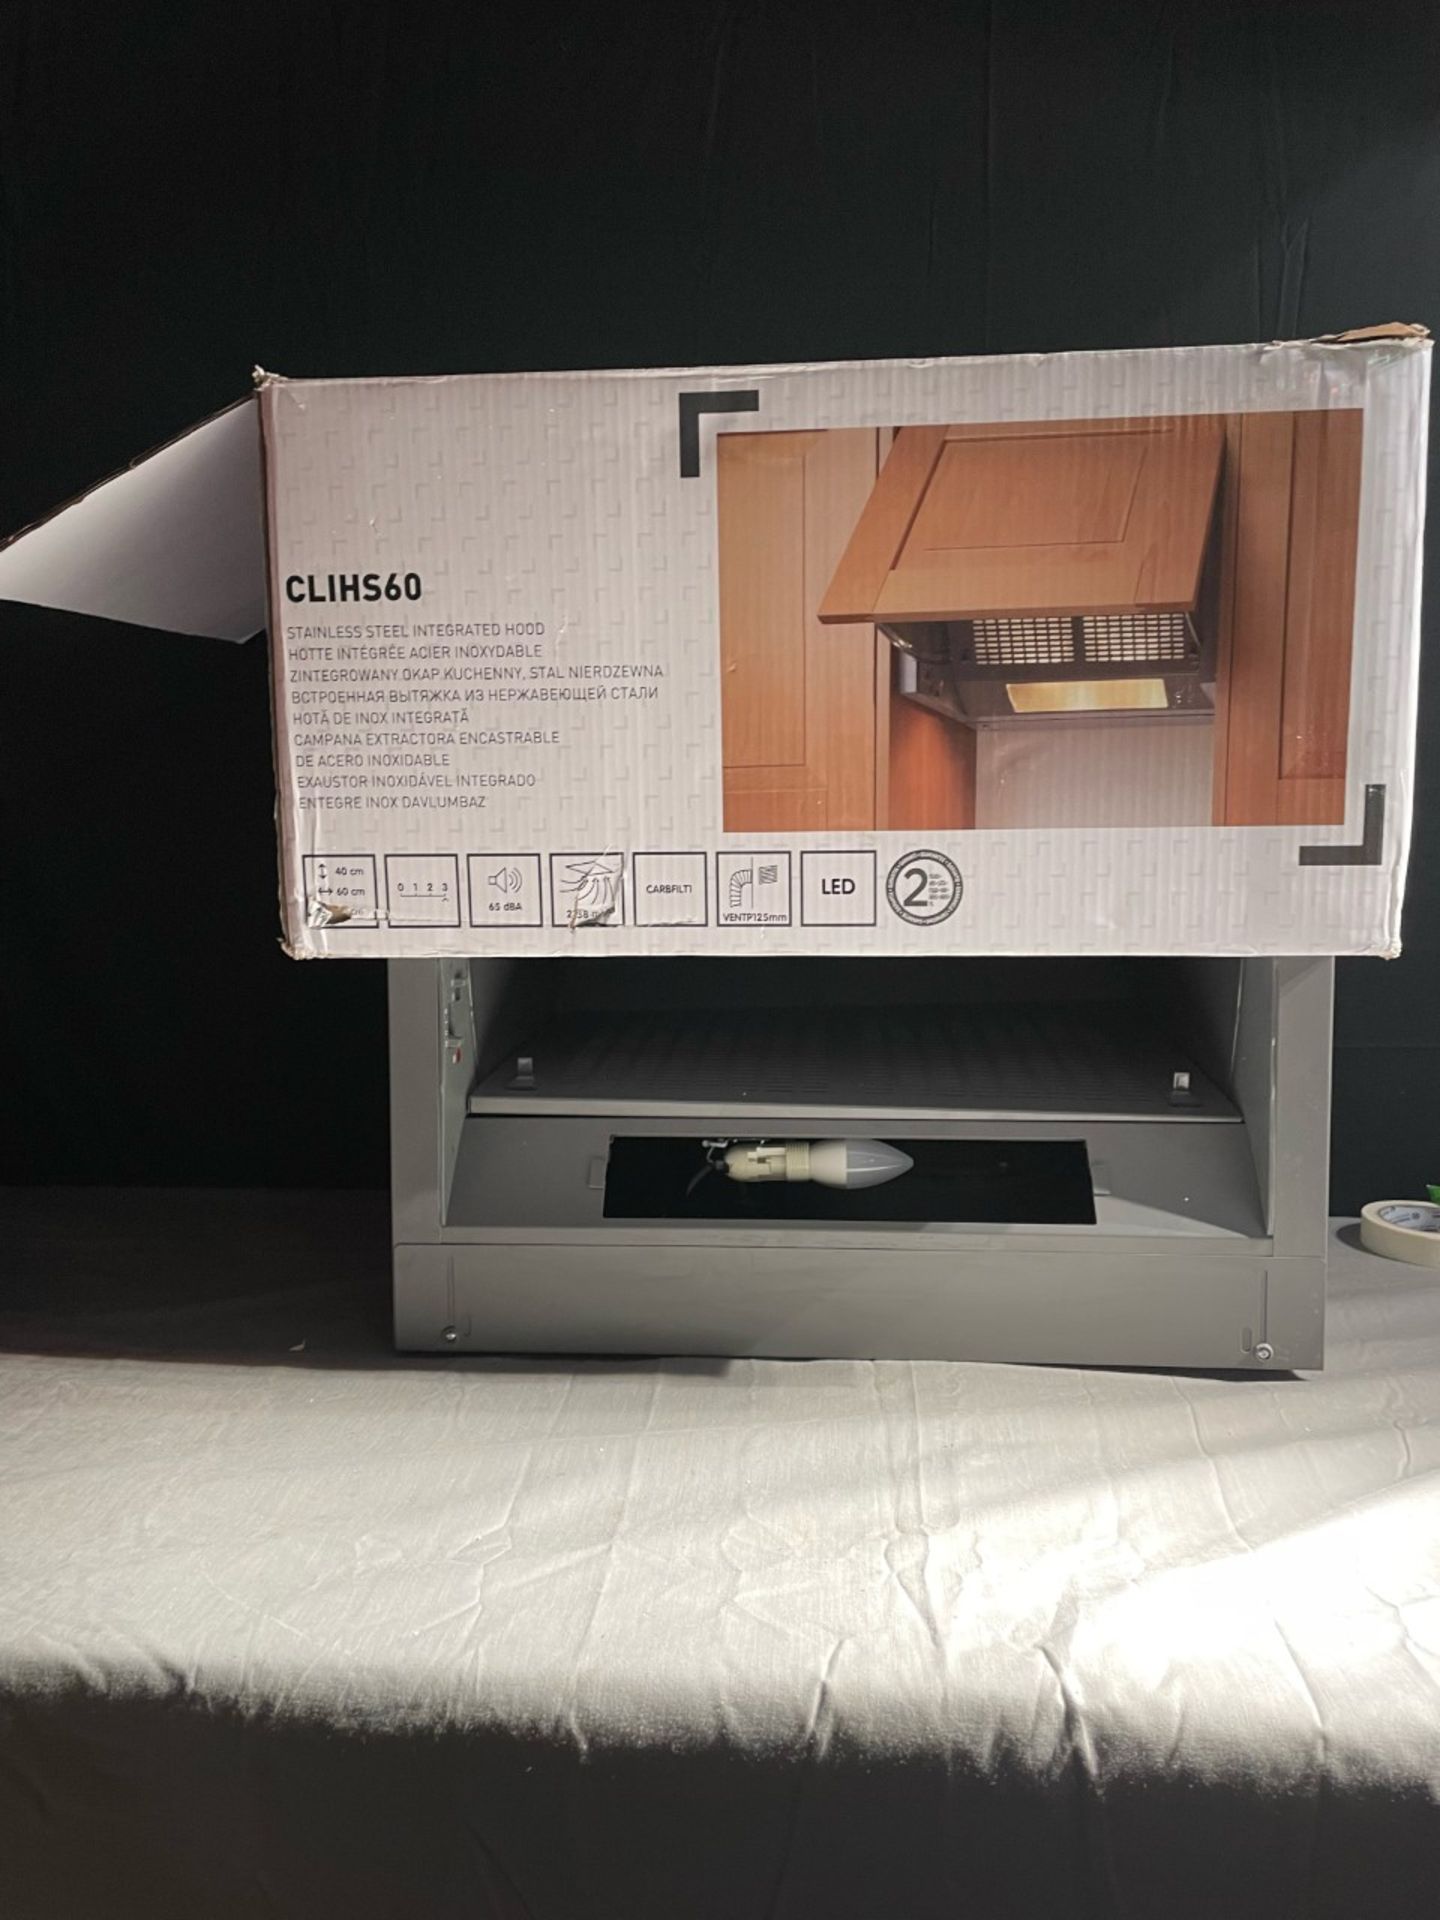 1 x new in box CLIHS60 600mm grey intergrated cooker hood.